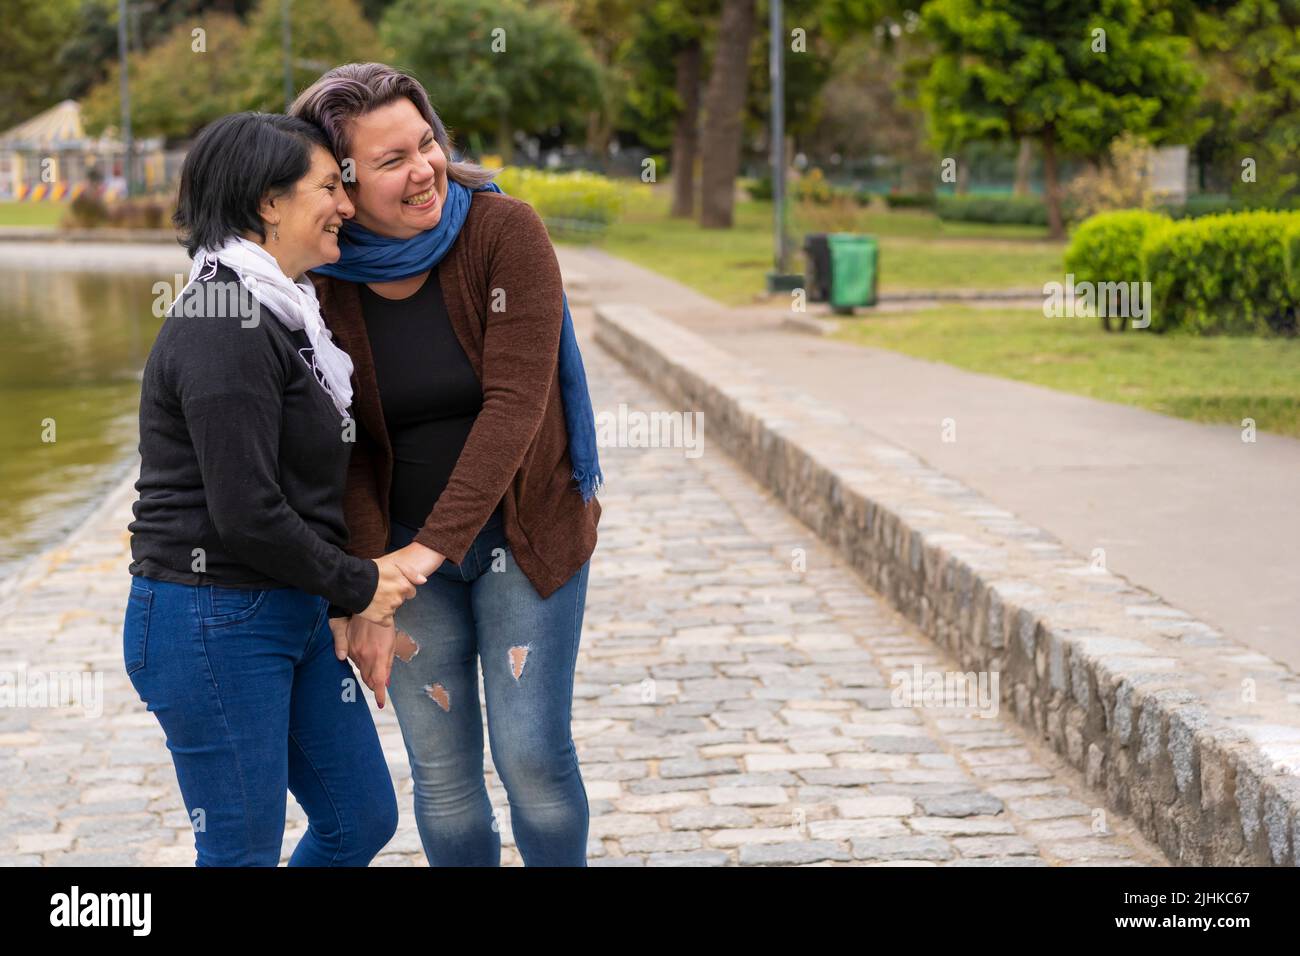 Lesbian couple in a park holding hands laughing. Copy space Stock Photo